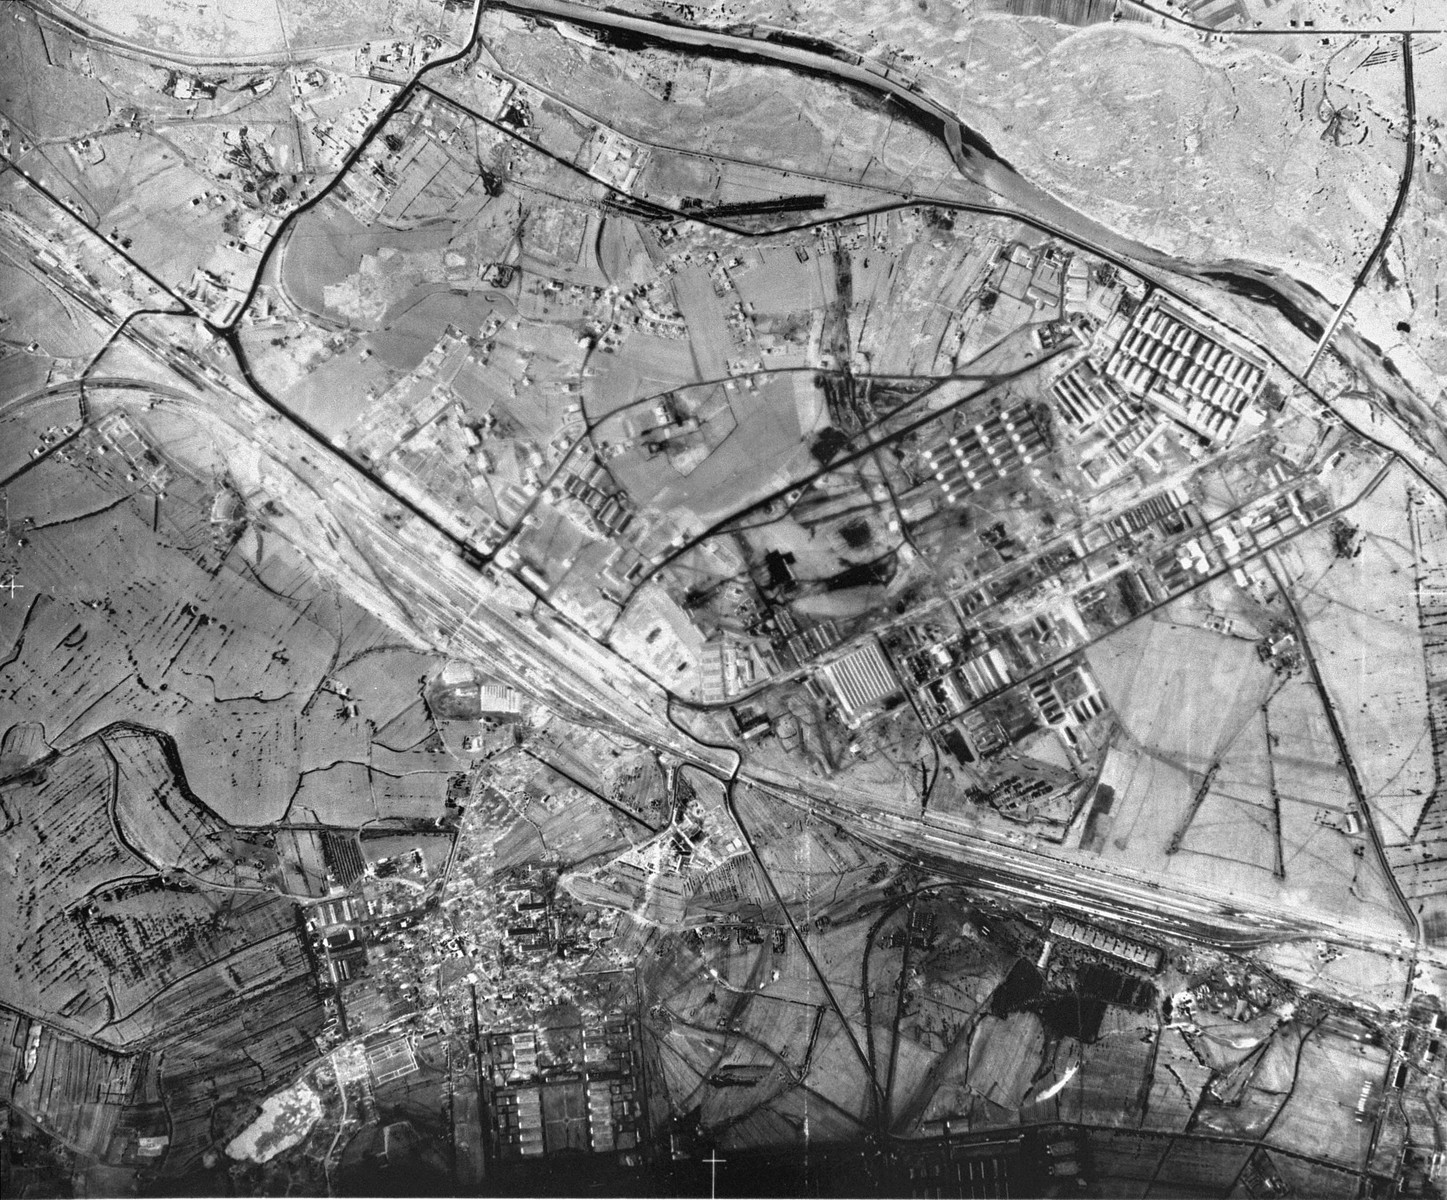 An aerial reconnaissance photograph of Auschwitz I showing the prisoners' barracks and administrative buildings which are visible along with the main railway lines.